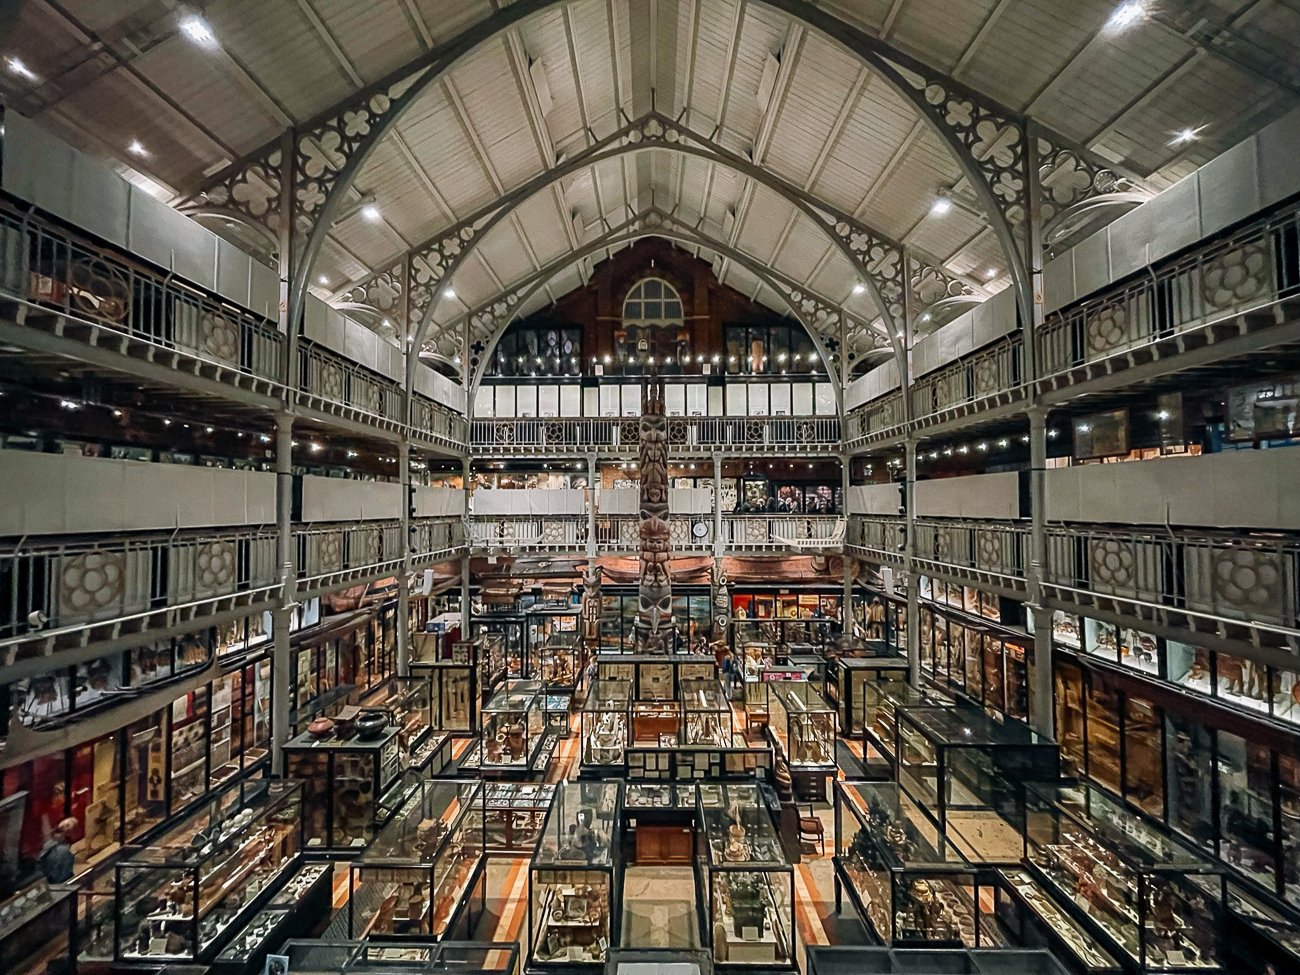 The Pitt Rivers Museum at Oxford University